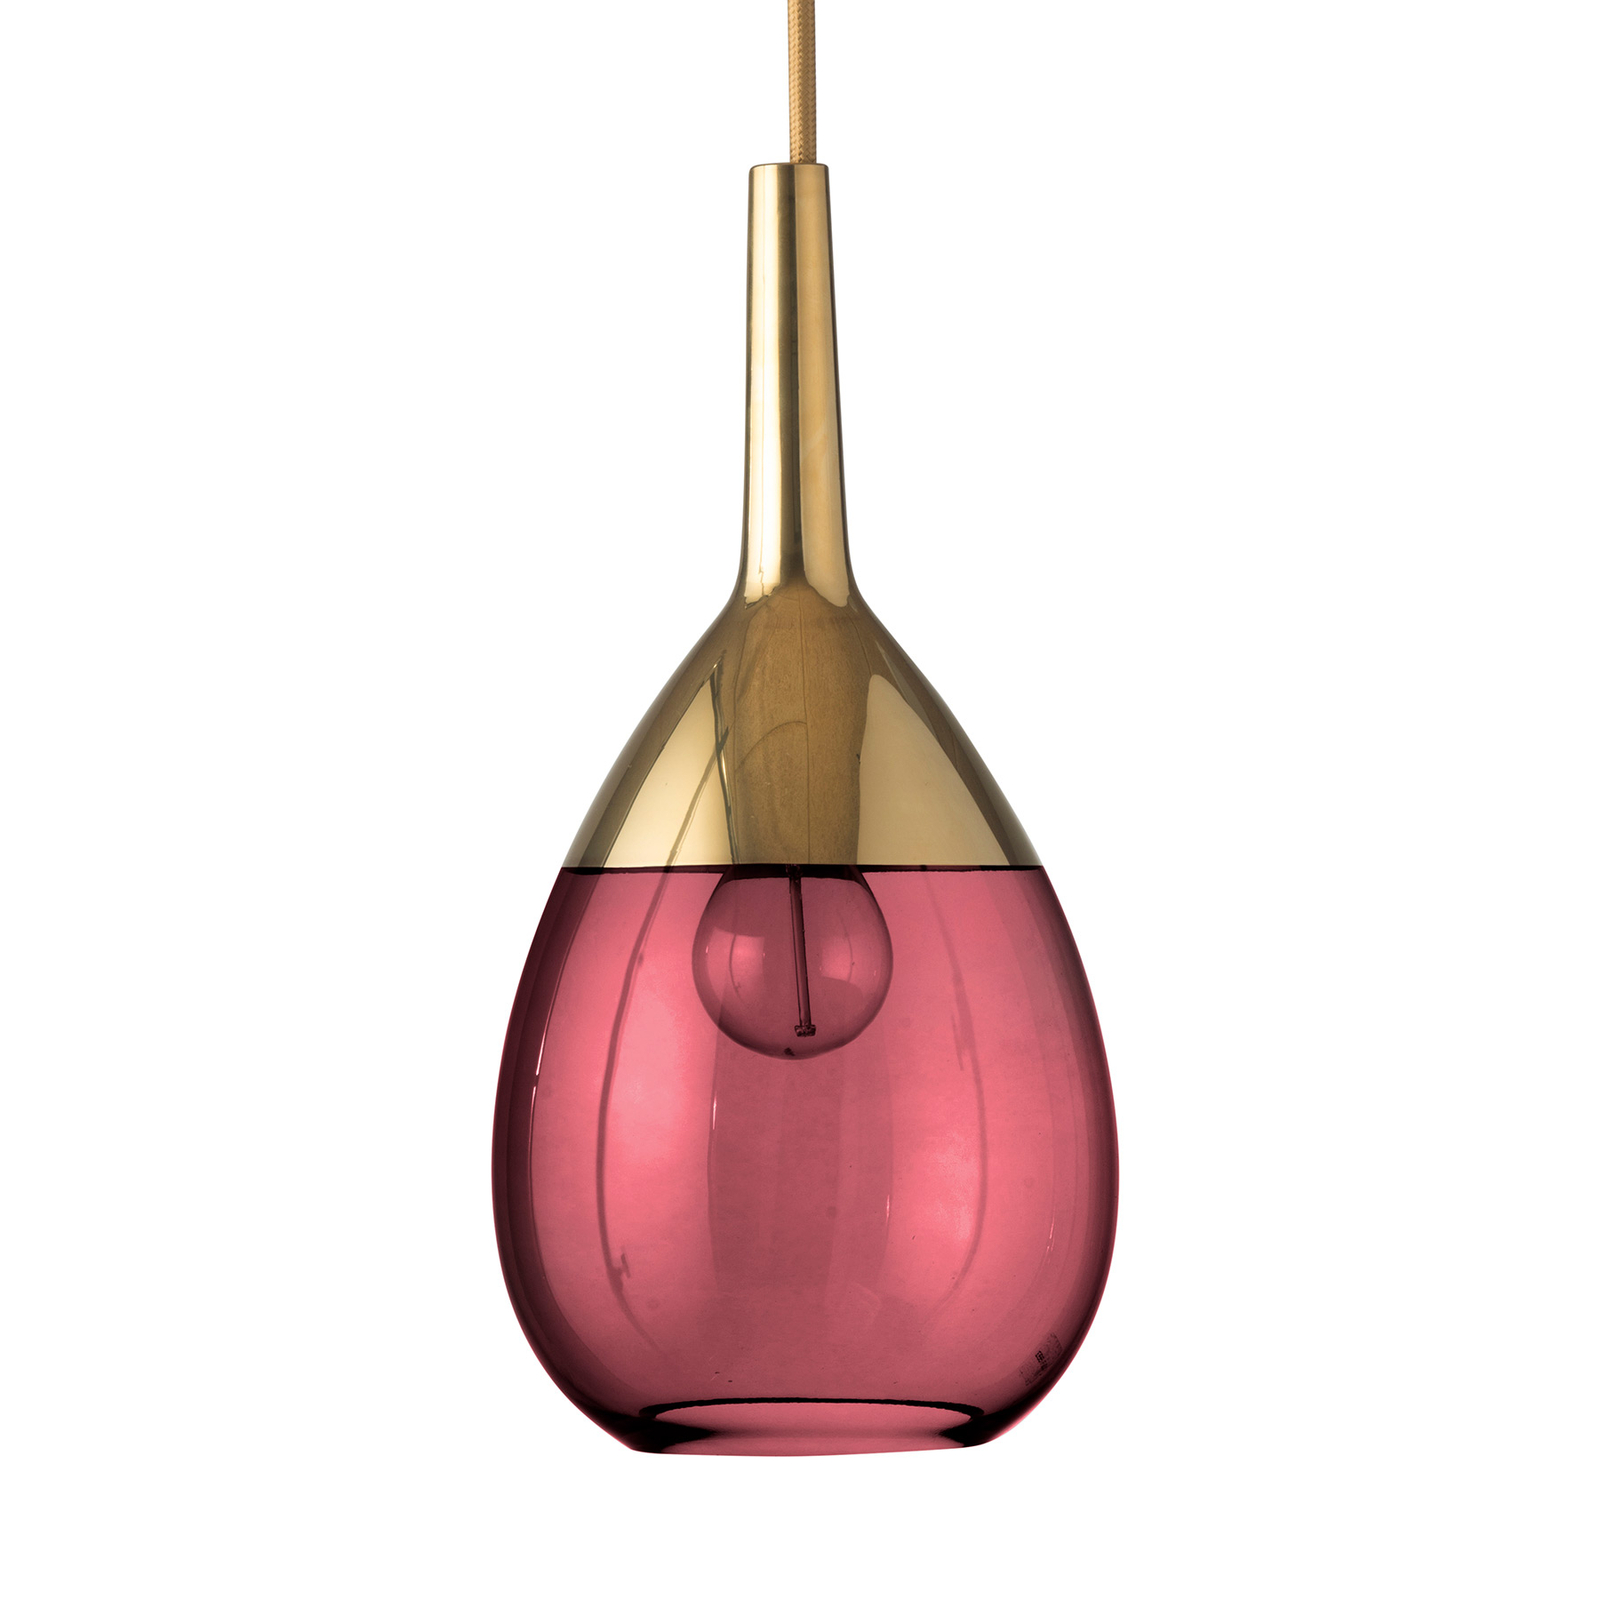 EBB & FLOW Lute S pendant lamp gold ruby red